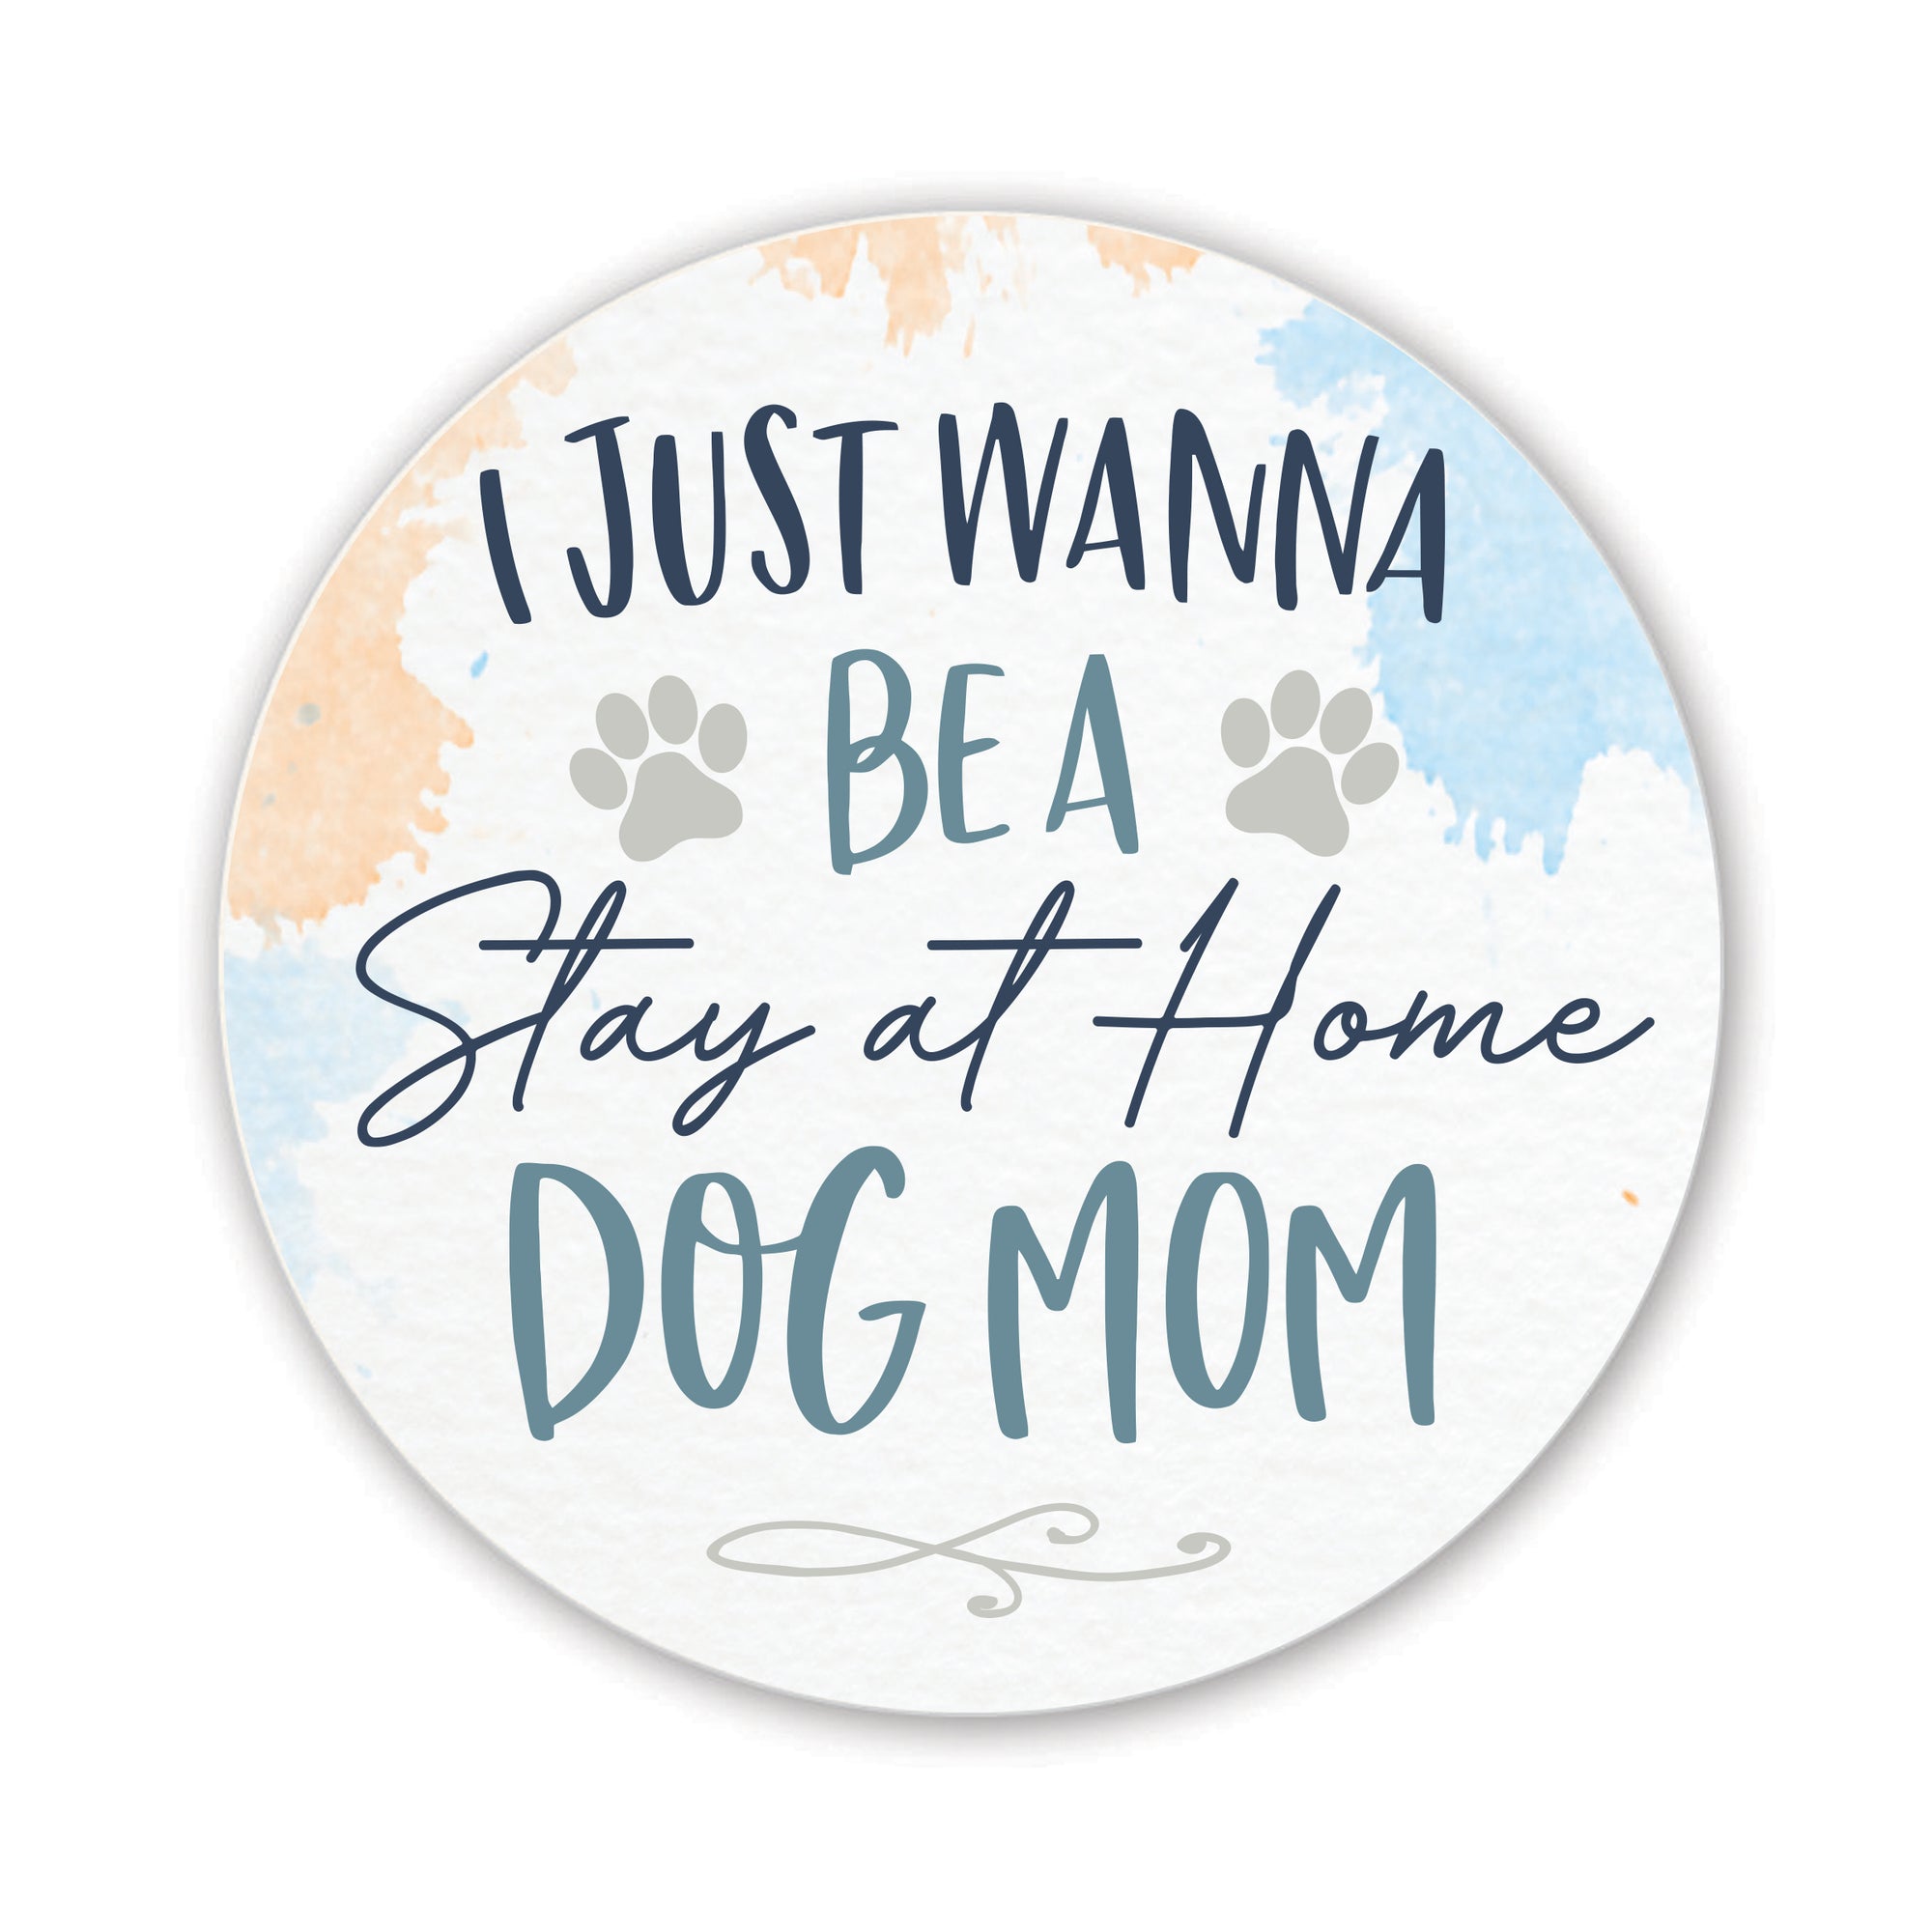 Refrigerator Magnet Perfect Gift Idea For Pet Owners - Stay At Home